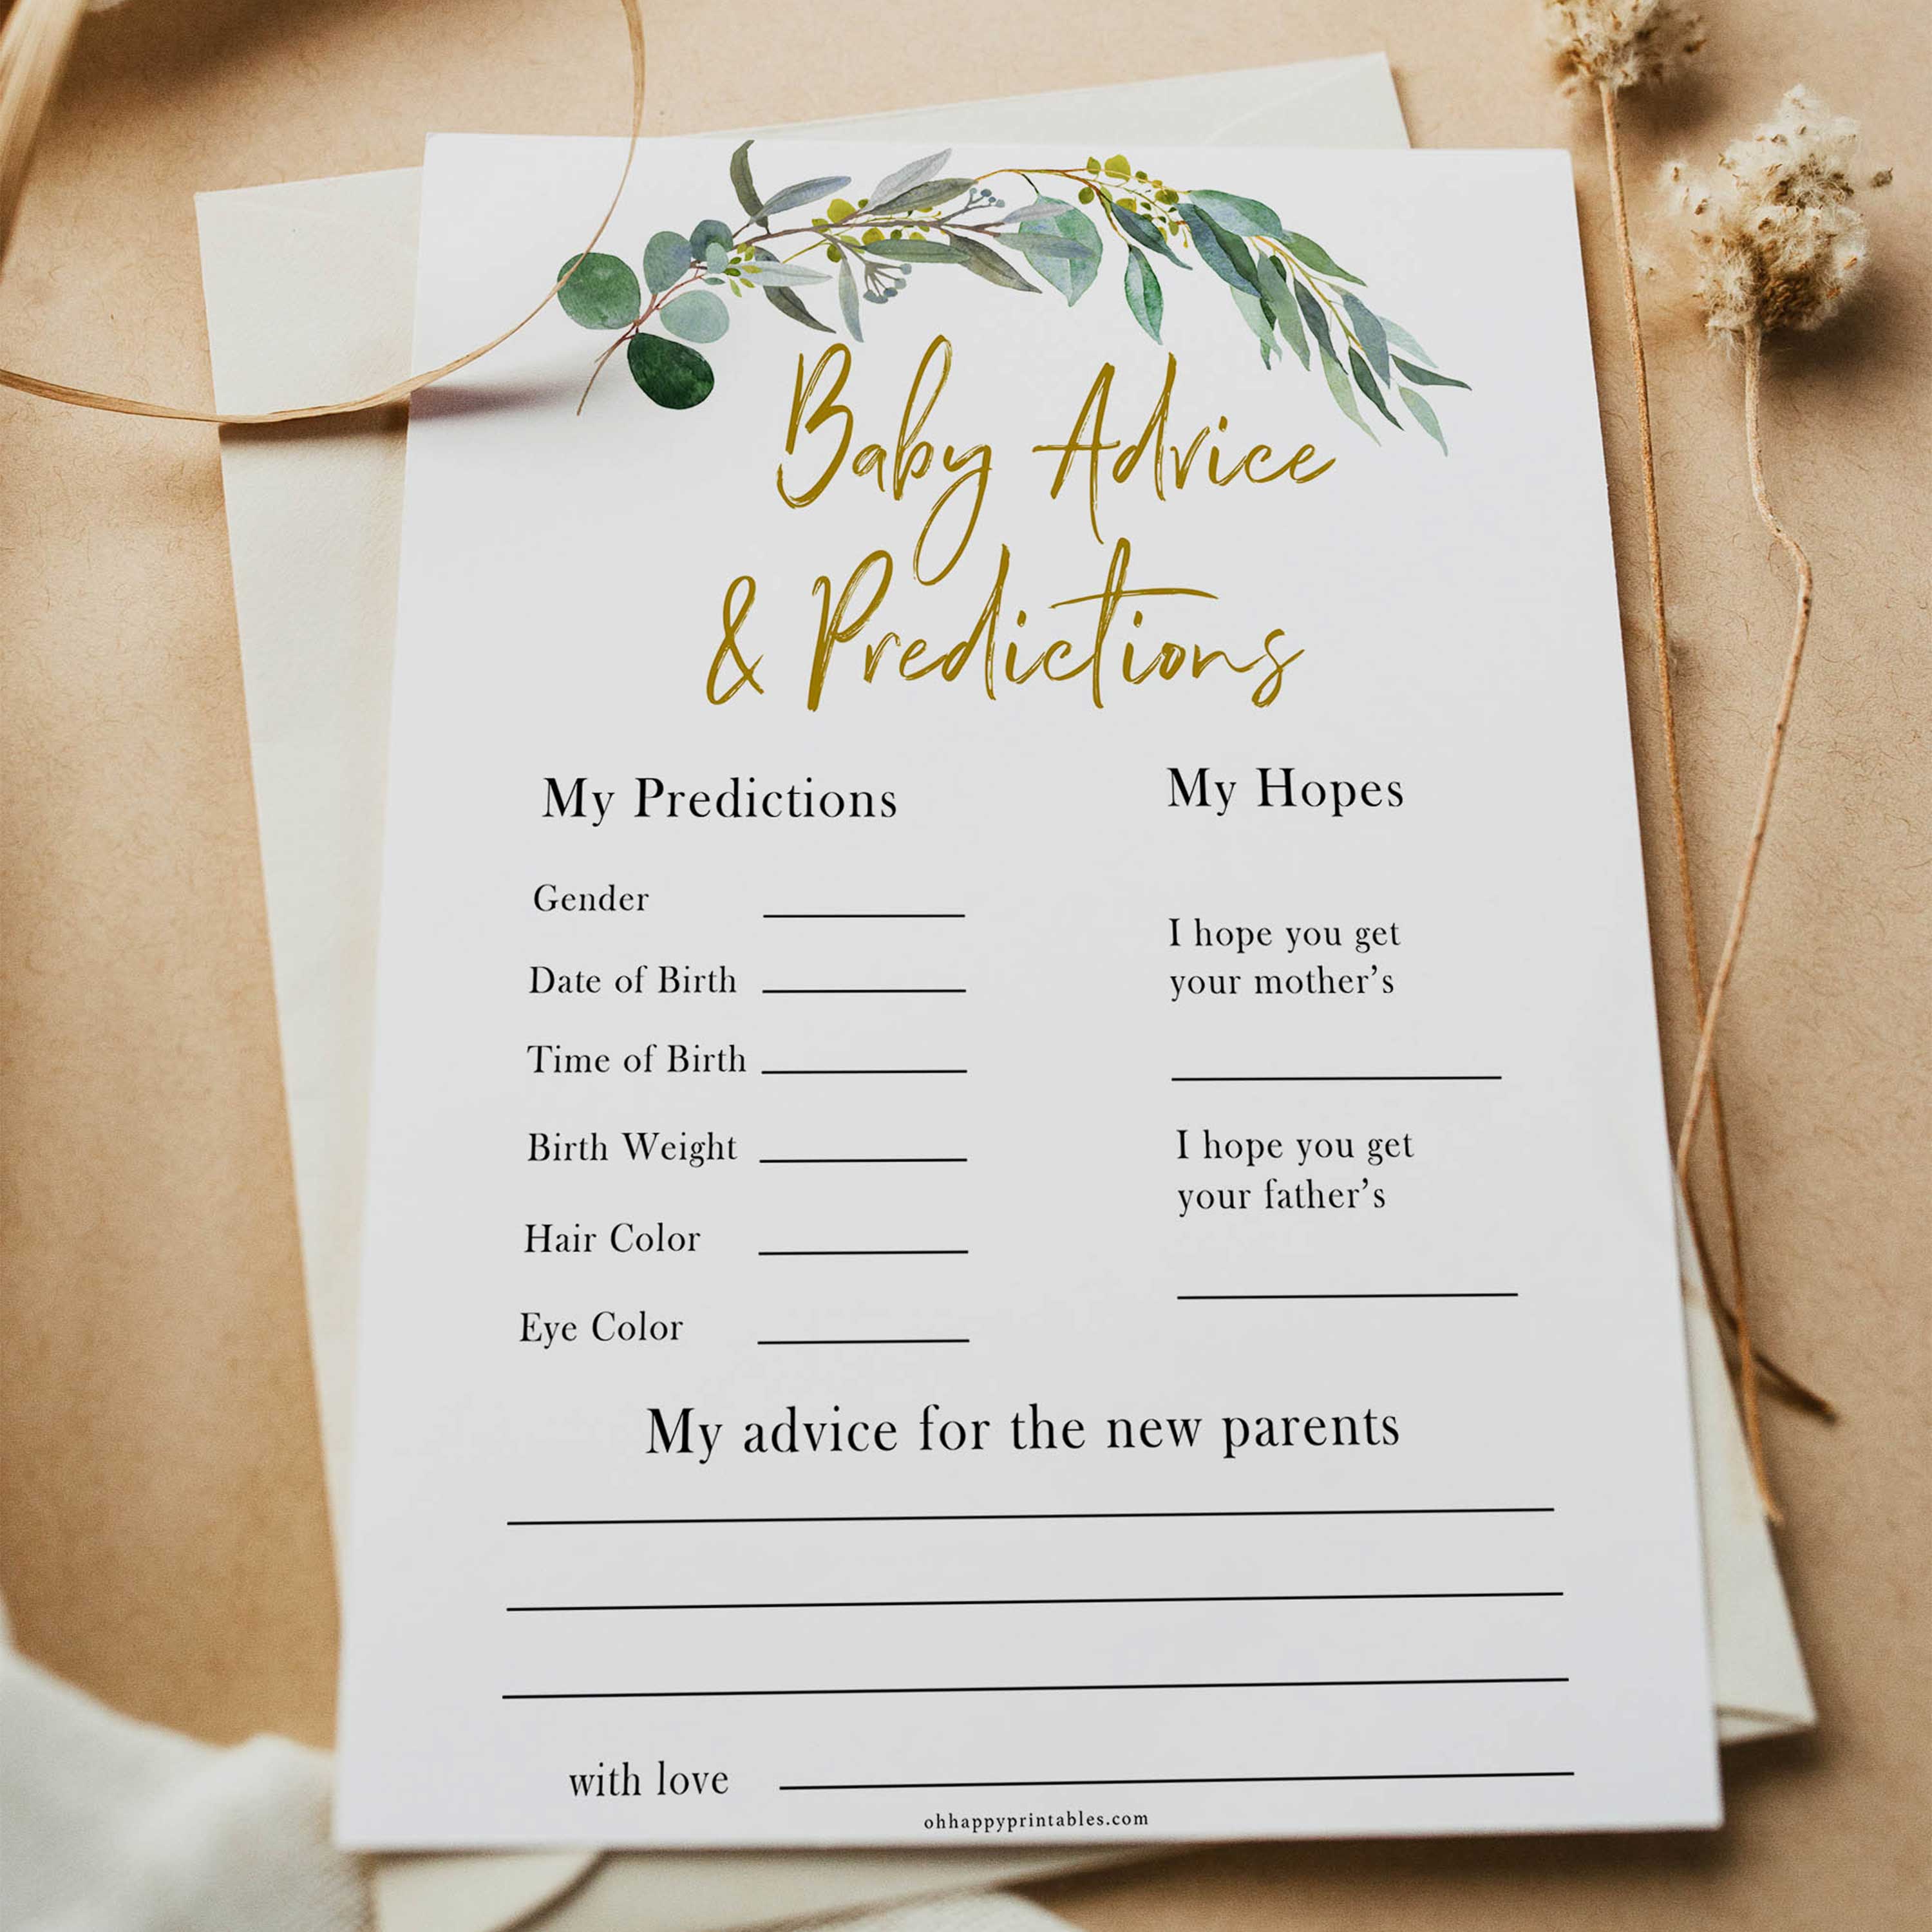 Eucalyptus baby shower games, baby advice and predictions baby game, fun baby shower games, printable baby games, baby shower ideas, baby games, baby shower baby shower bundle, baby shower games packs, botanical baby shower